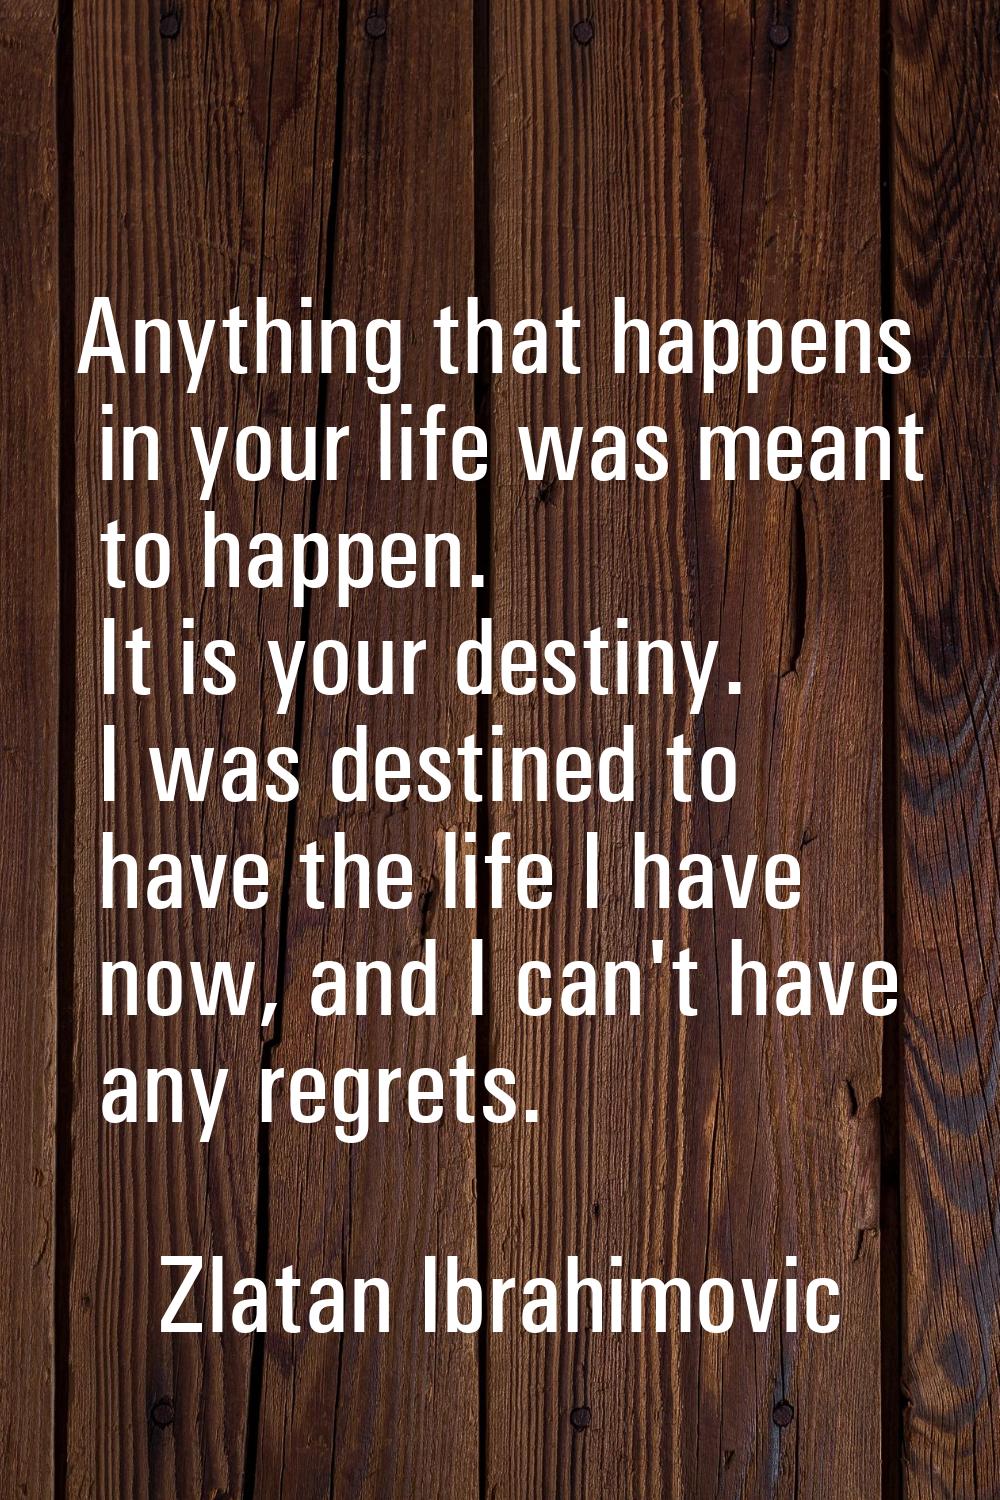 Anything that happens in your life was meant to happen. It is your destiny. I was destined to have 